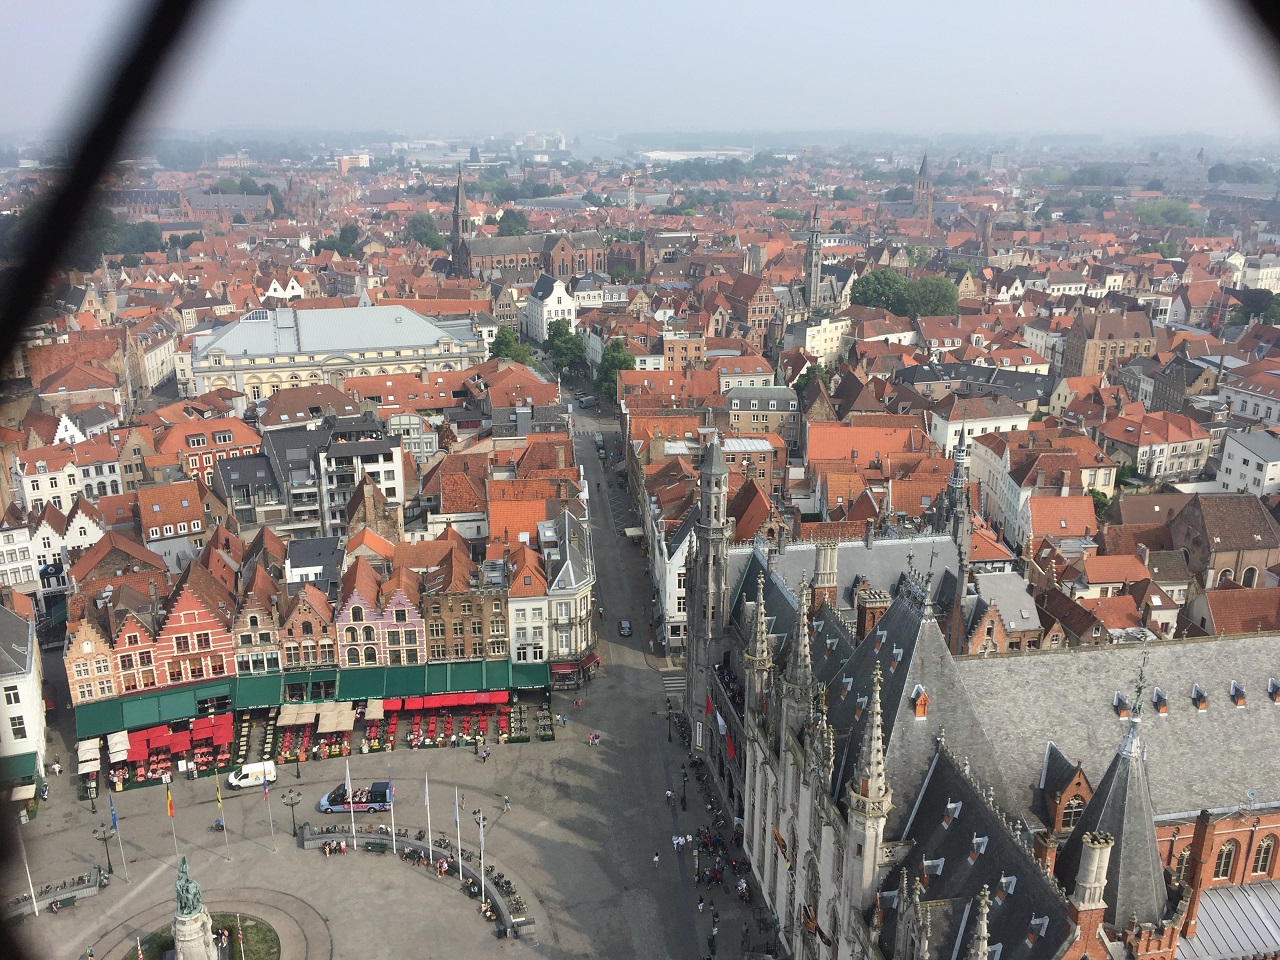 Bruges Belfry Climb Views of the City from the Bell Tower